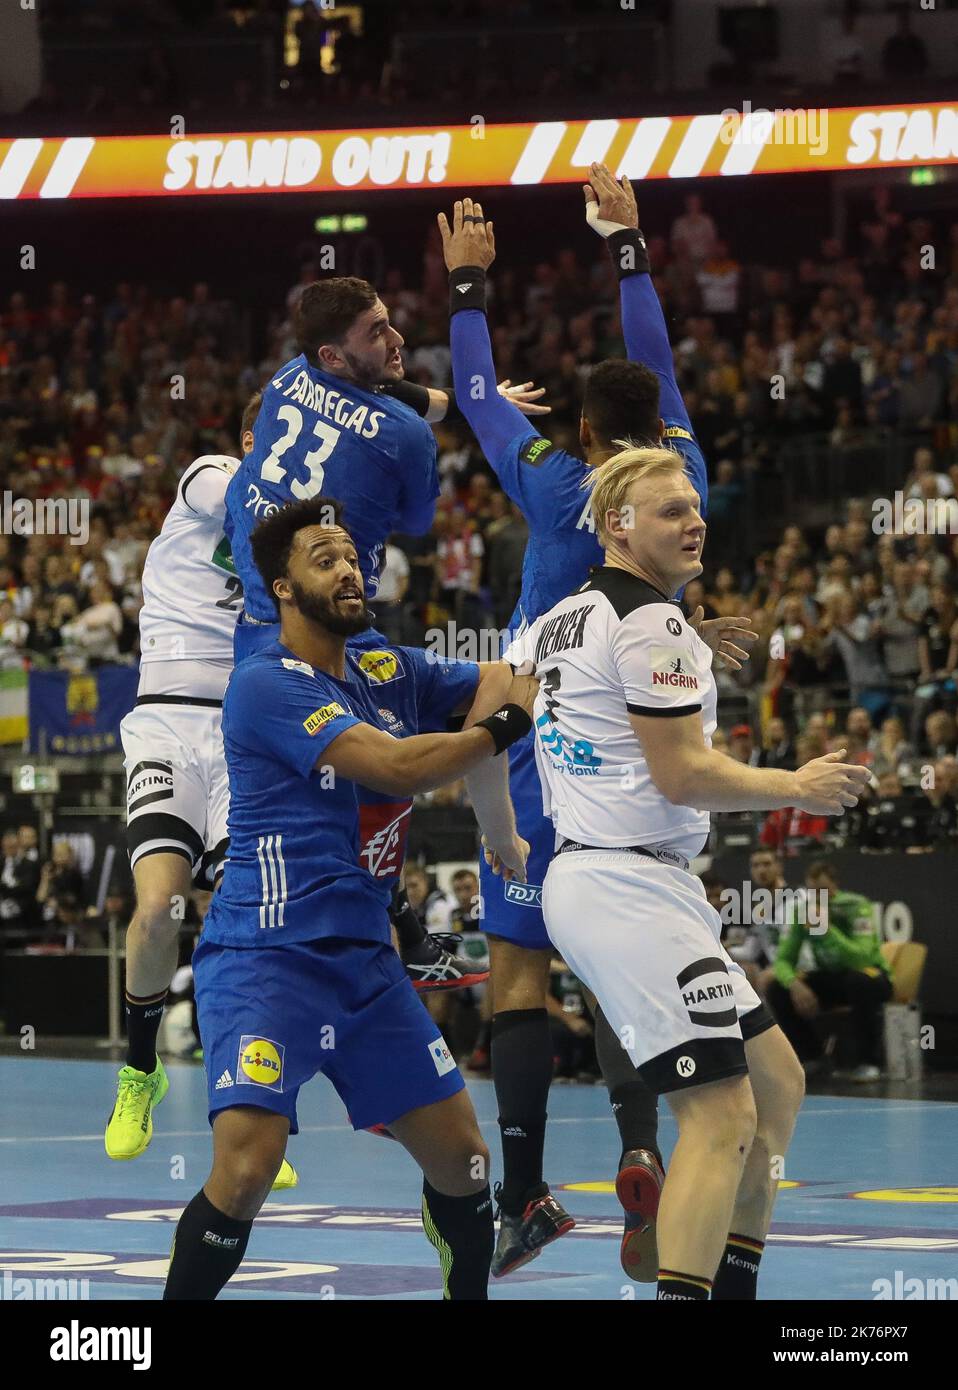 Patrick Wiencek (Germany) and Timothey N'Guessan,Adrien Dipanda,Ludovic Fabregas (France) during the IHF Men's World Championship 2019, Group A handball match between Germany and France on January 15, 2019 at Mercedes-Benz Arena in Berlin, Germany  Stock Photo